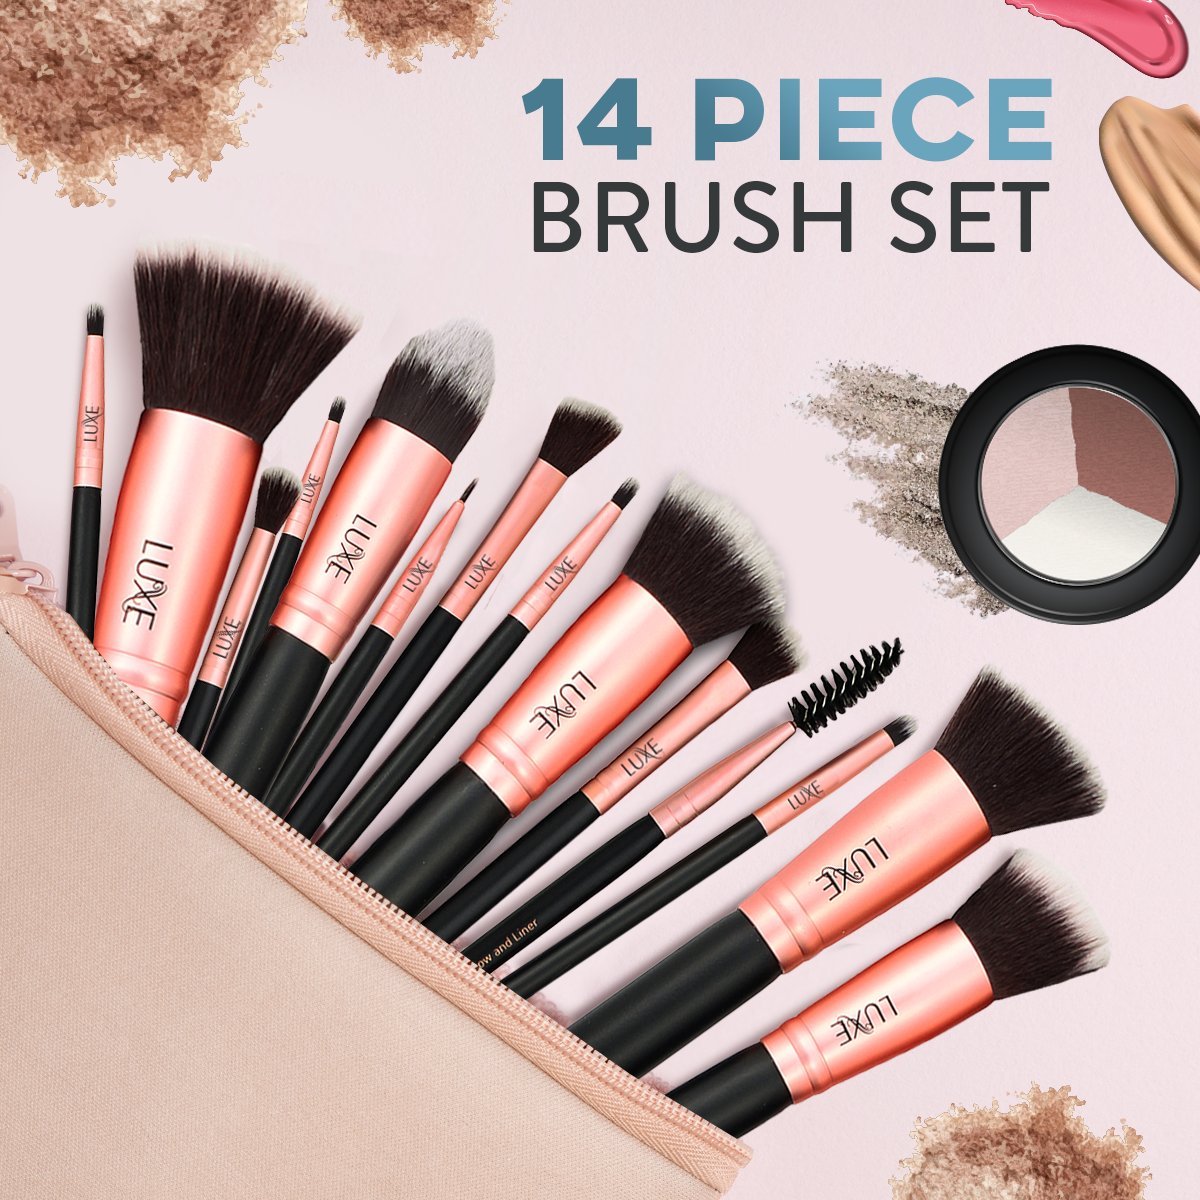 Luxe Premium Makeup Brushes Set for Face and Eye - Synthetic Brushes for Foundation, Powder, Blush, Eyeshadow - Brush Cleaning Solution Included - Perfect Make Up Brushes Kit, Beauty Brush Set (14pc)